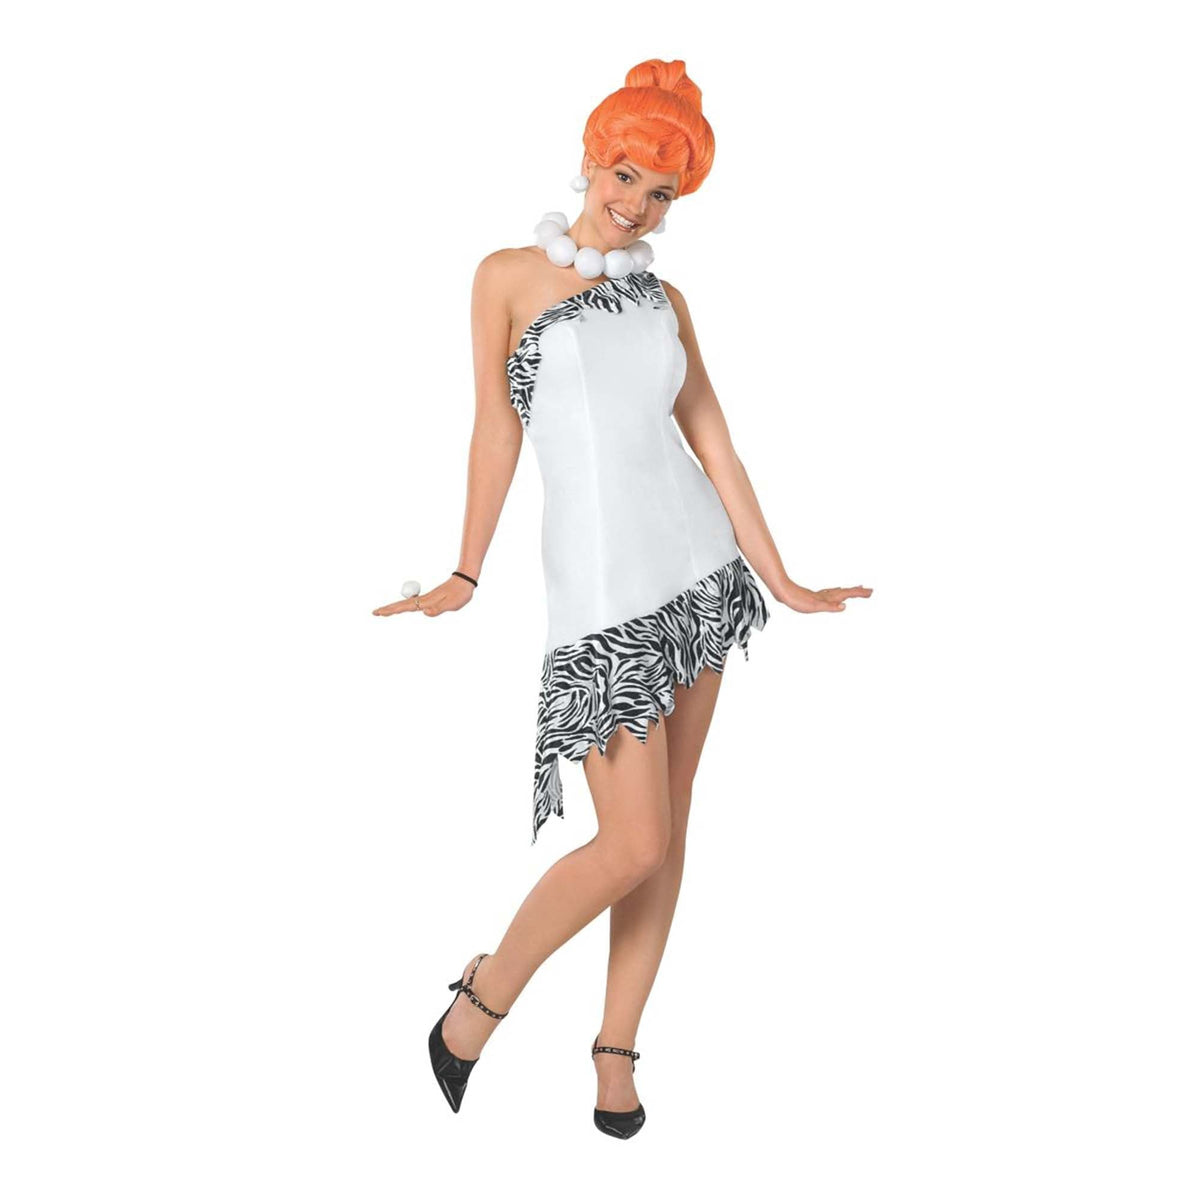 RUBIES II (Ruby Slipper Sales) Costumes The Flintstones Wilma Costume for Adults, White Dress